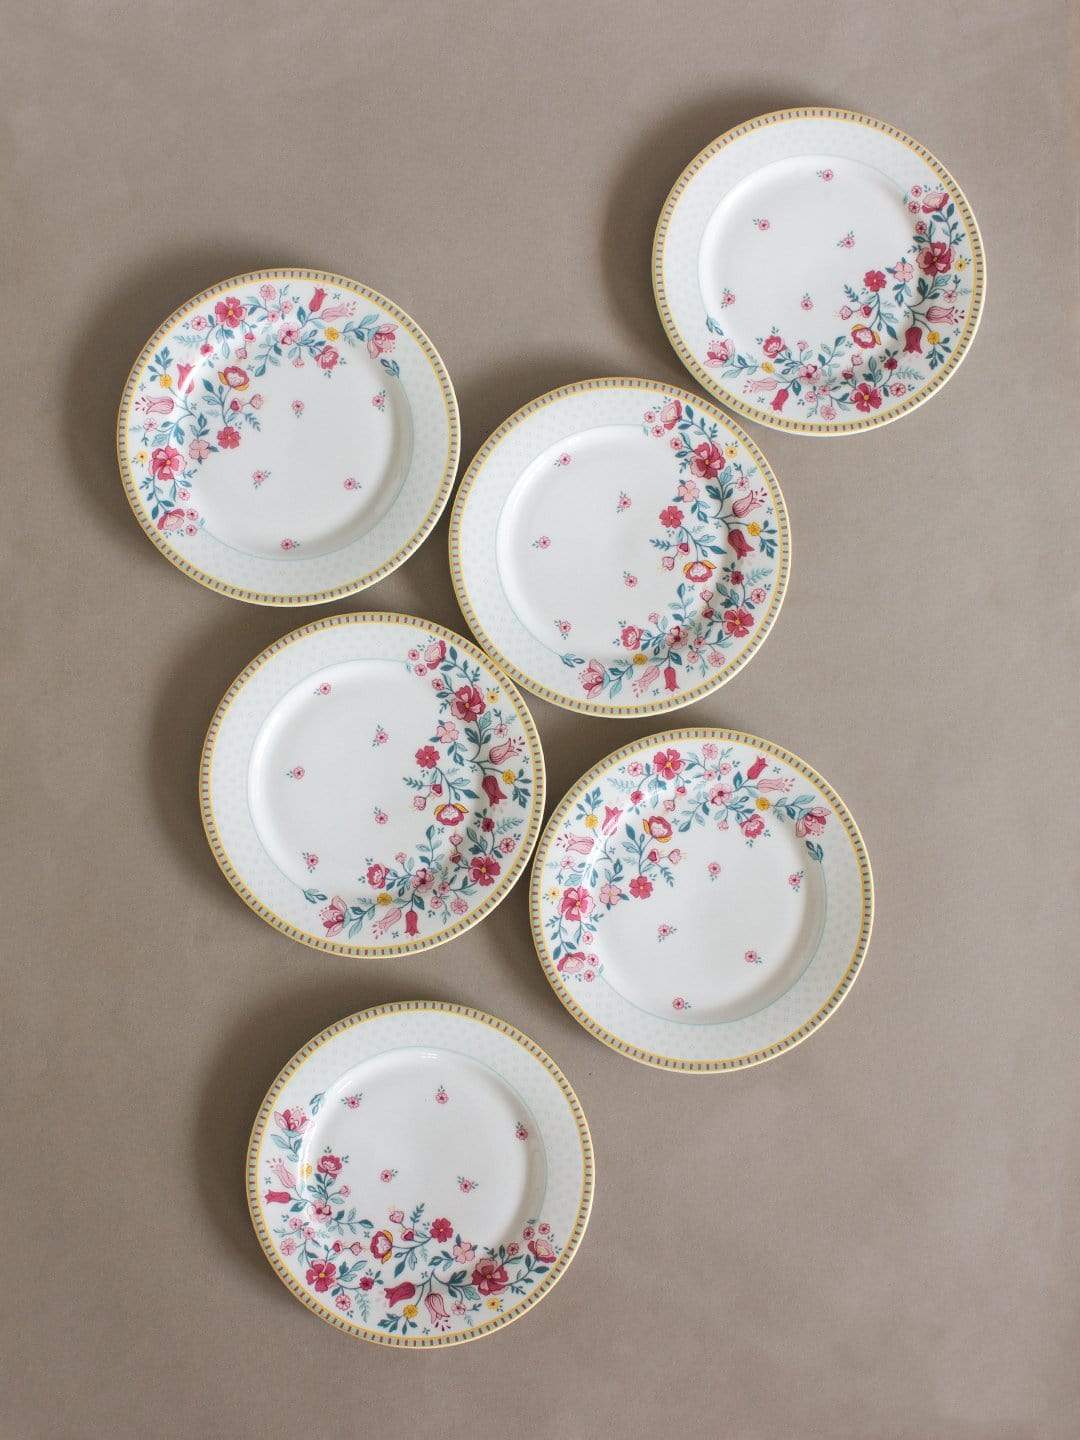 Raindrops and Roses Dessert Plate -Set of 6